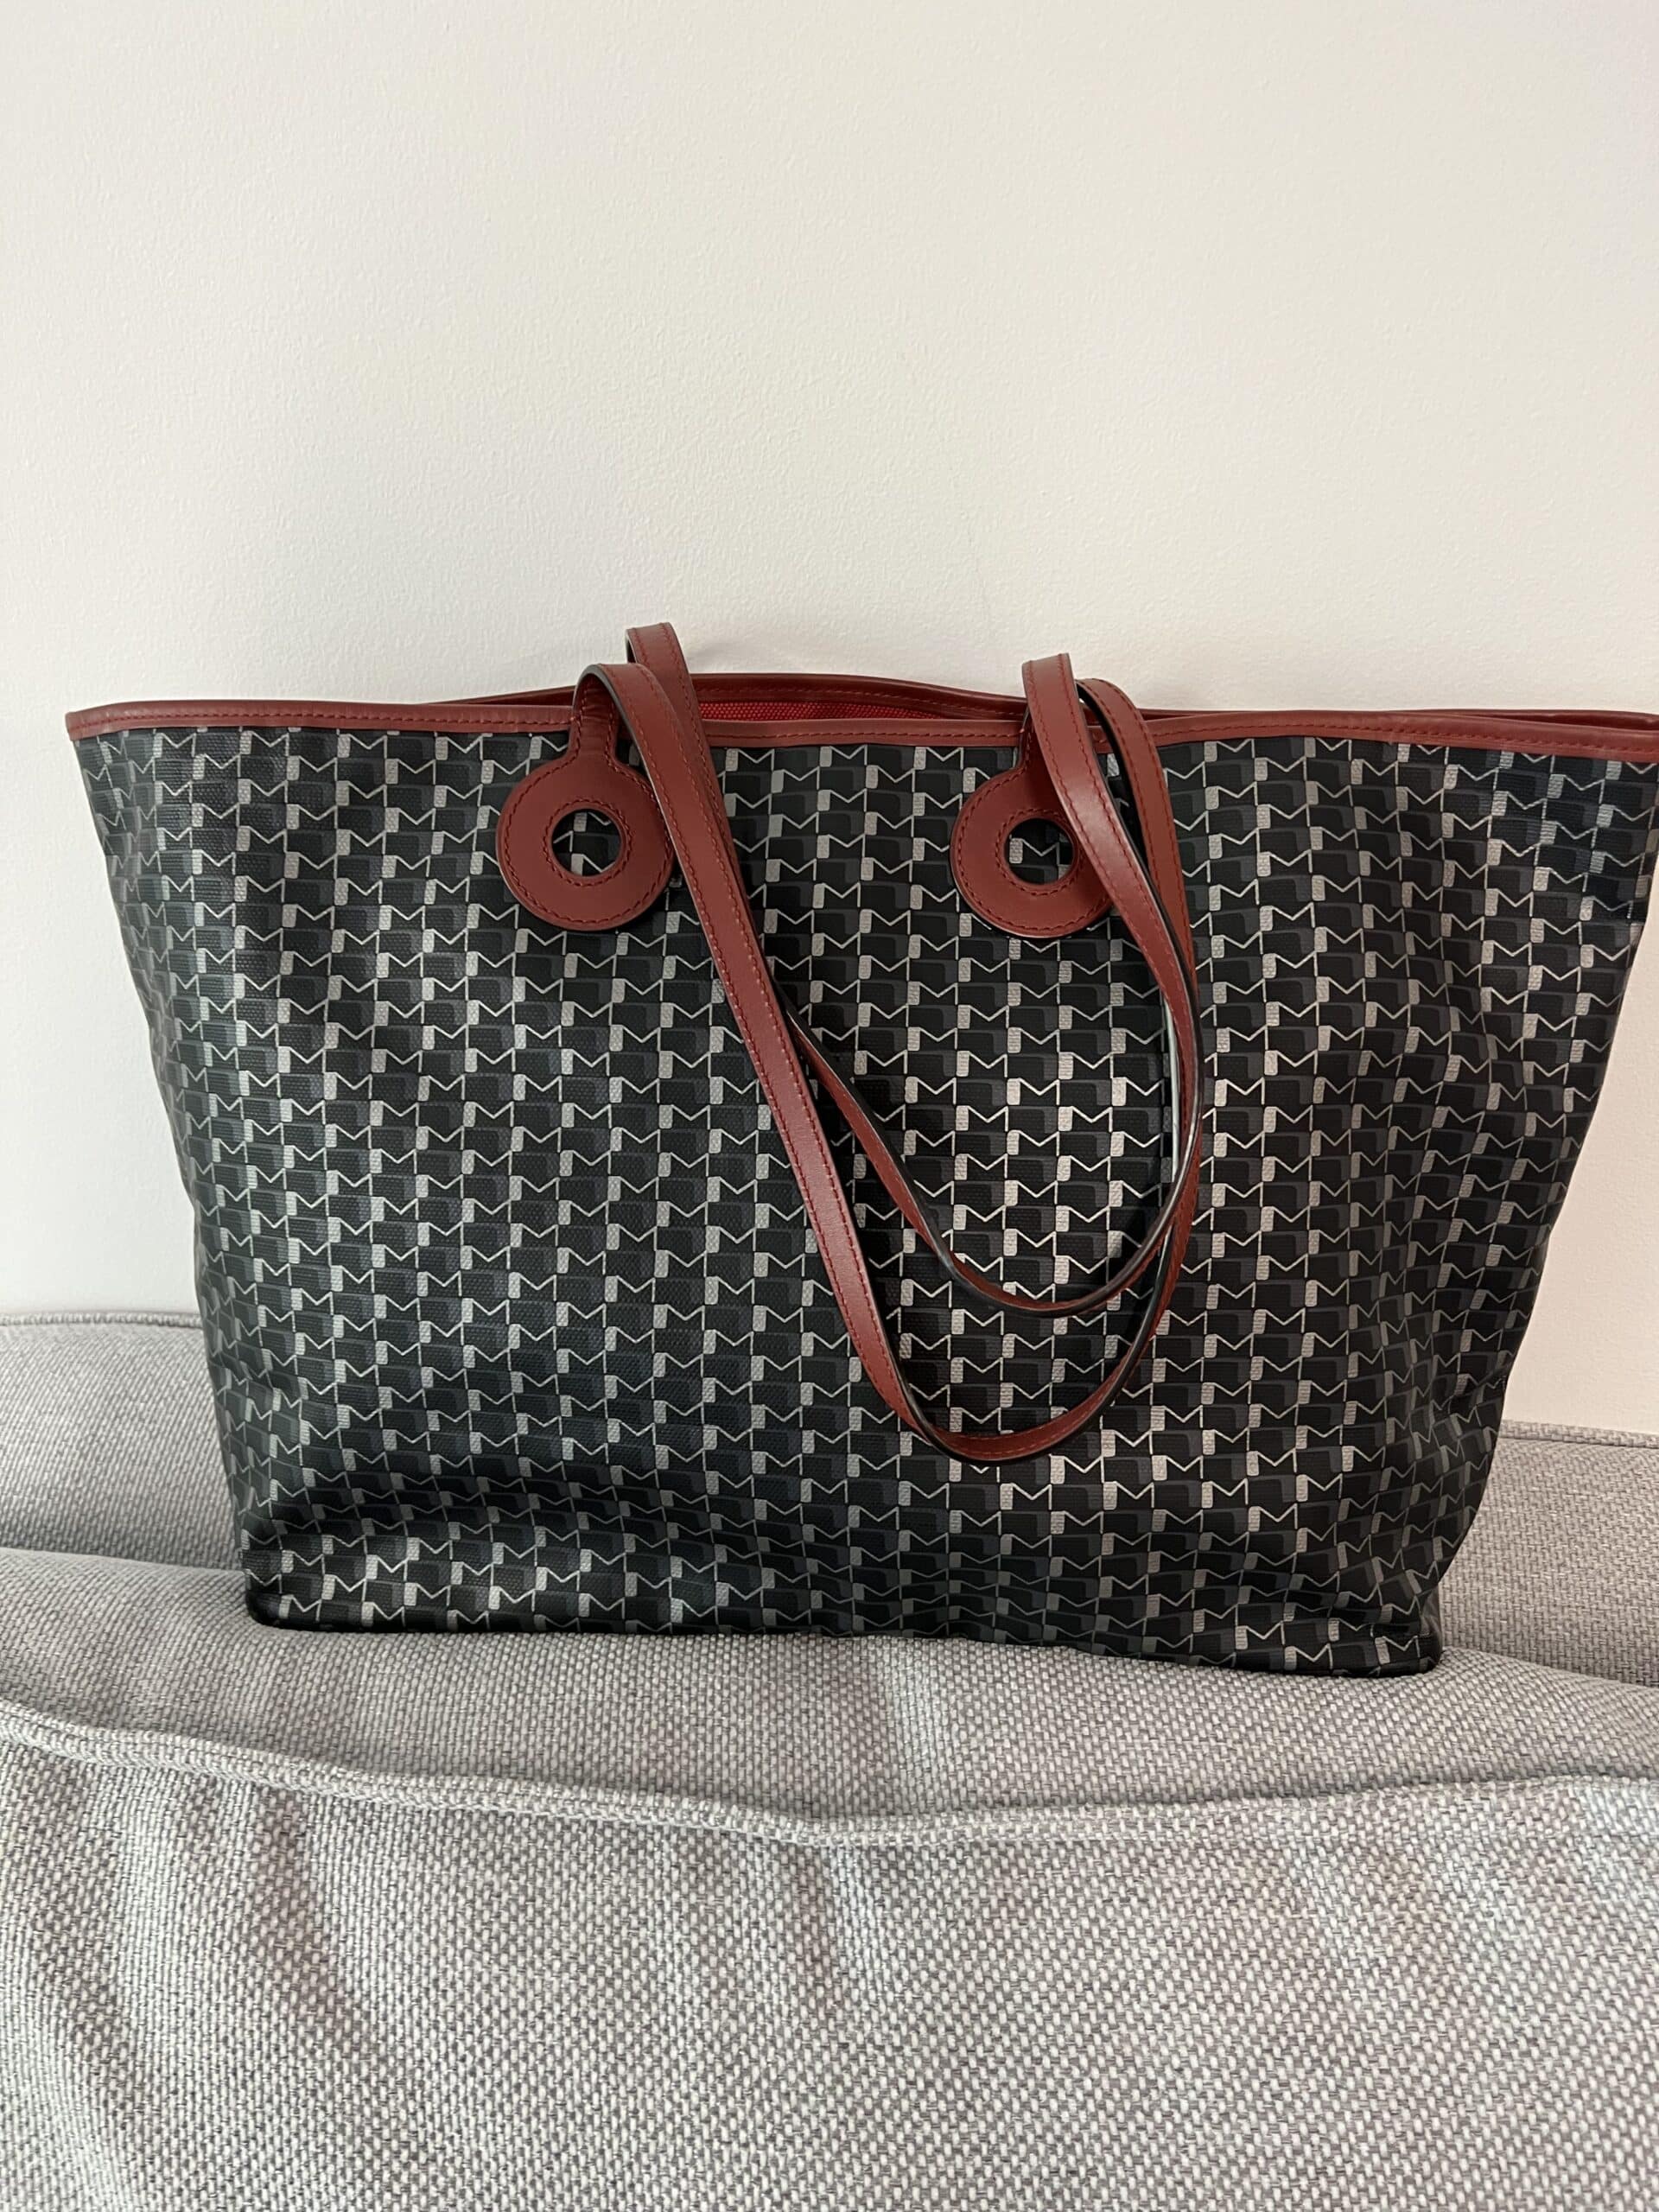 Moynat OH Tote carbon silver leather GM size - The Luxury Flavor